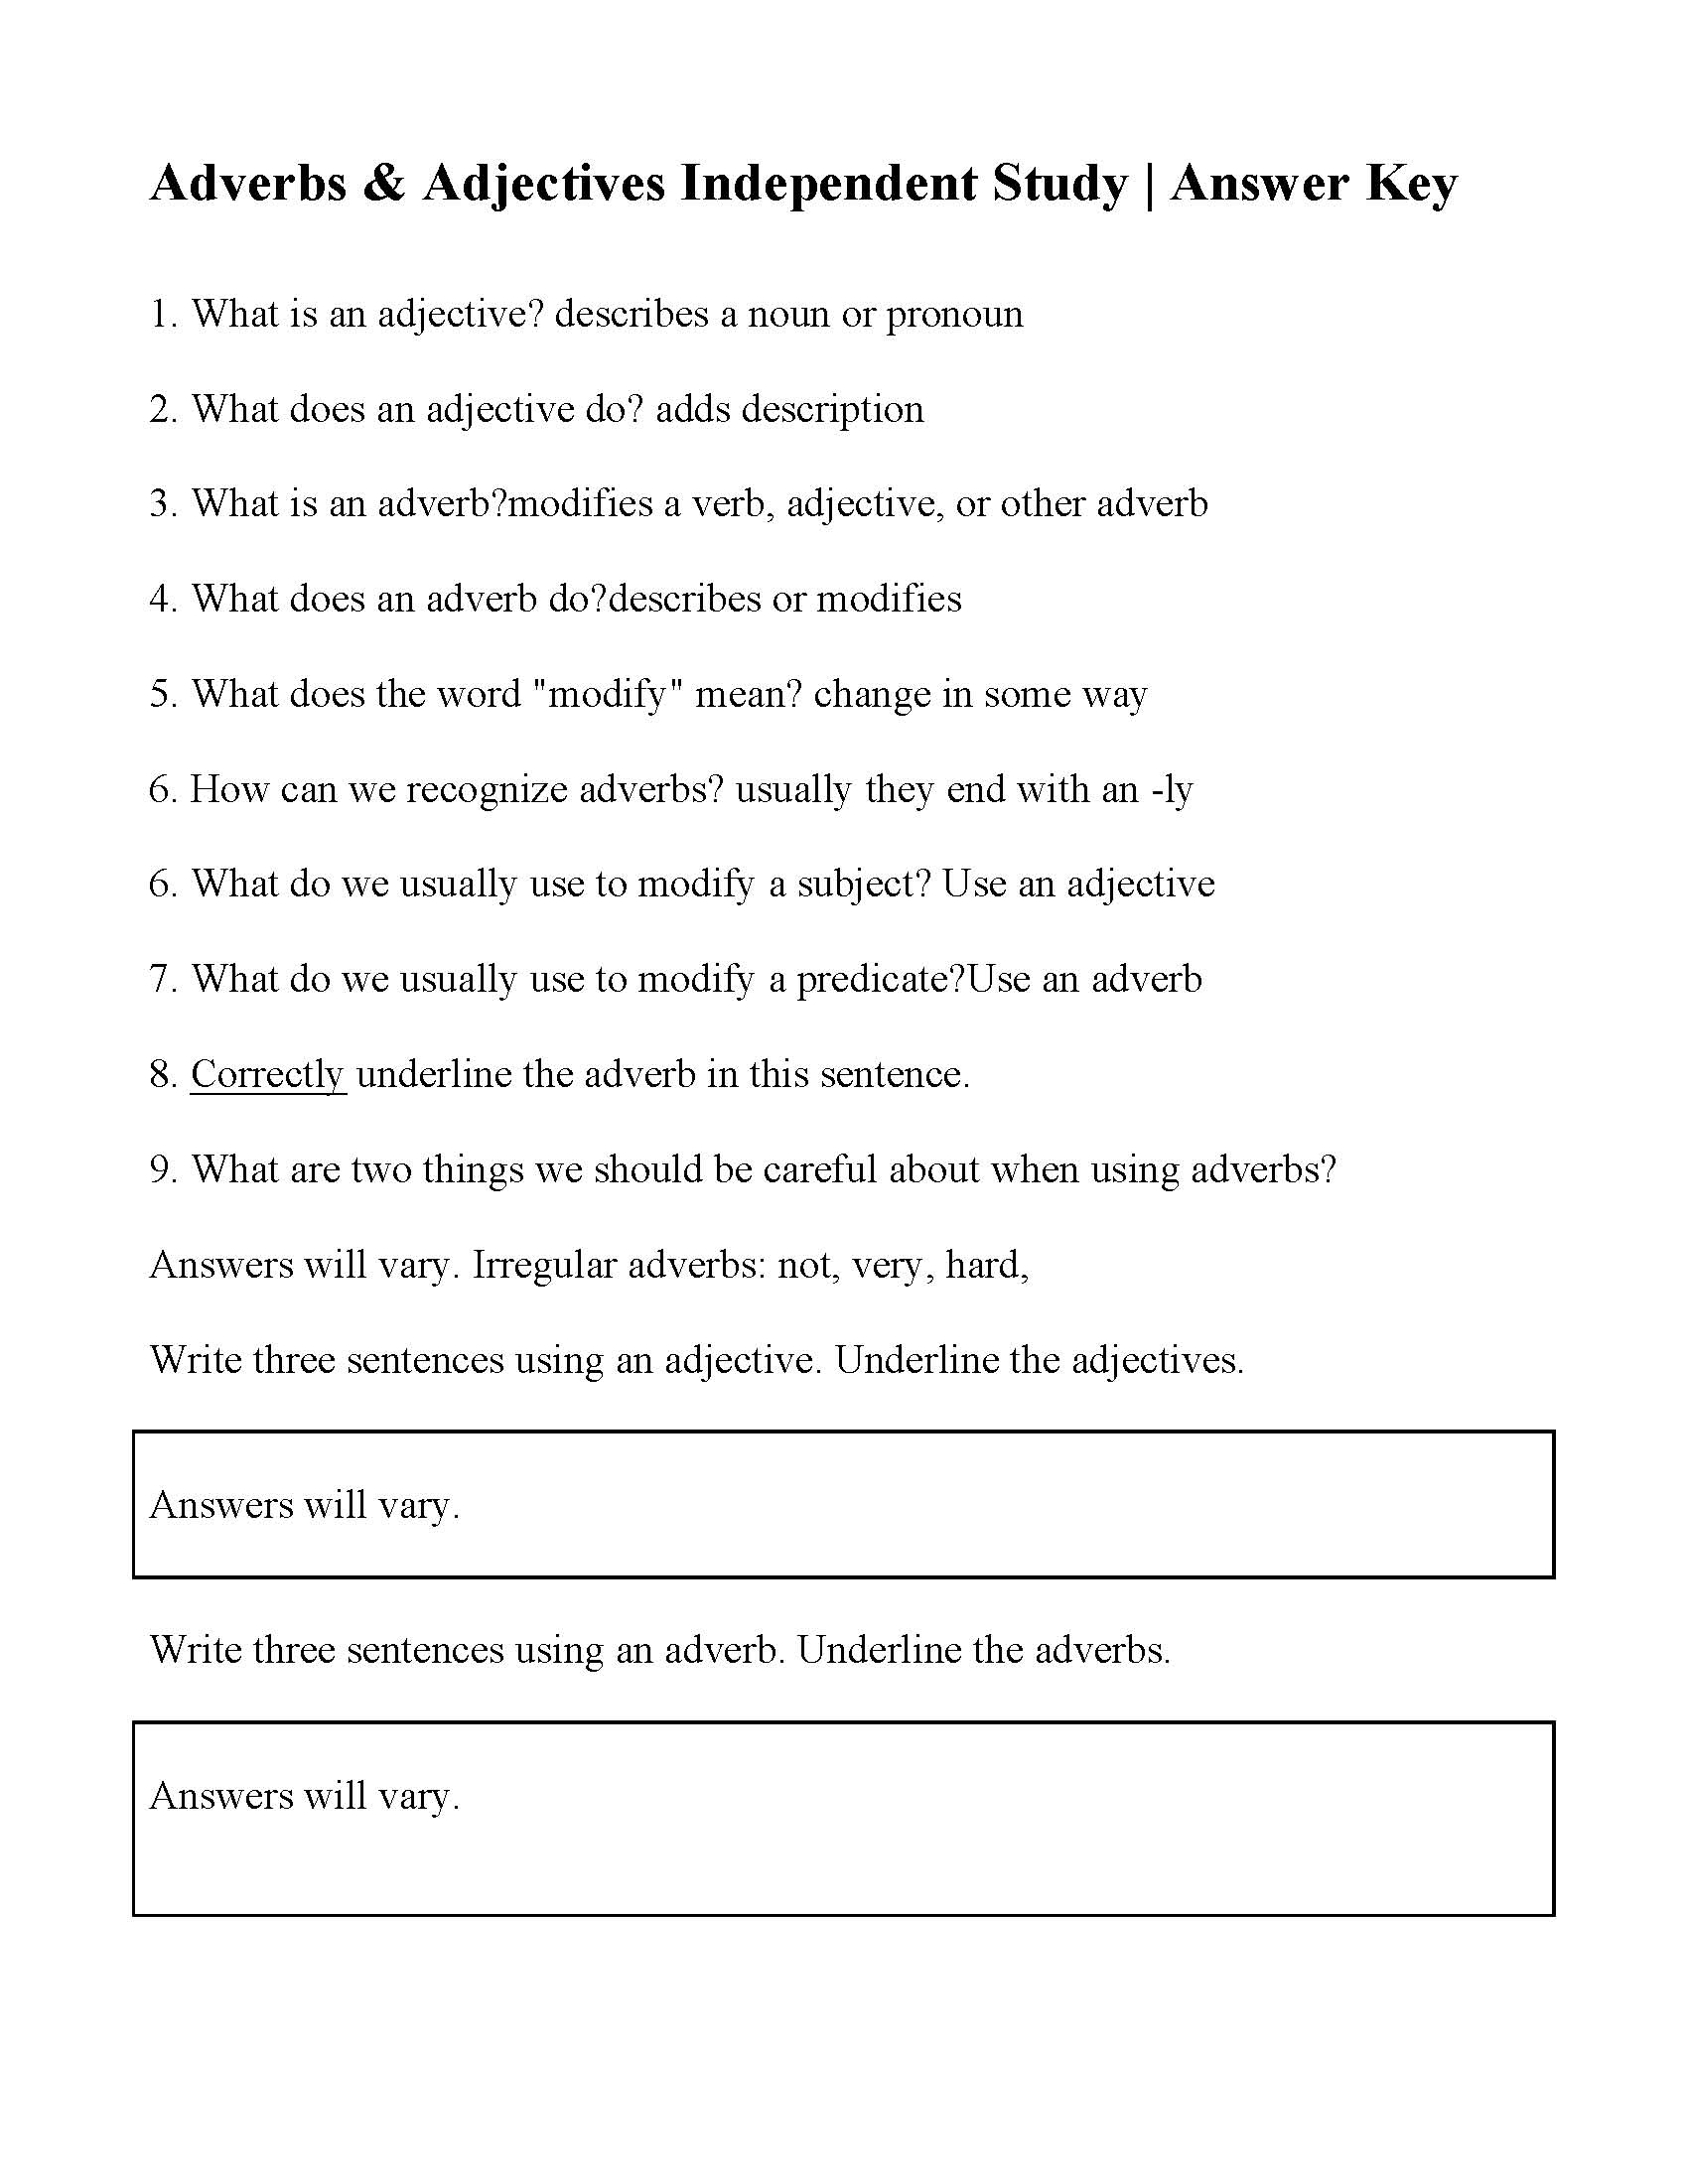 adjective-and-adverb-worksheets-with-answer-key-db-excelcom-adjective-and-adverb-worksheets